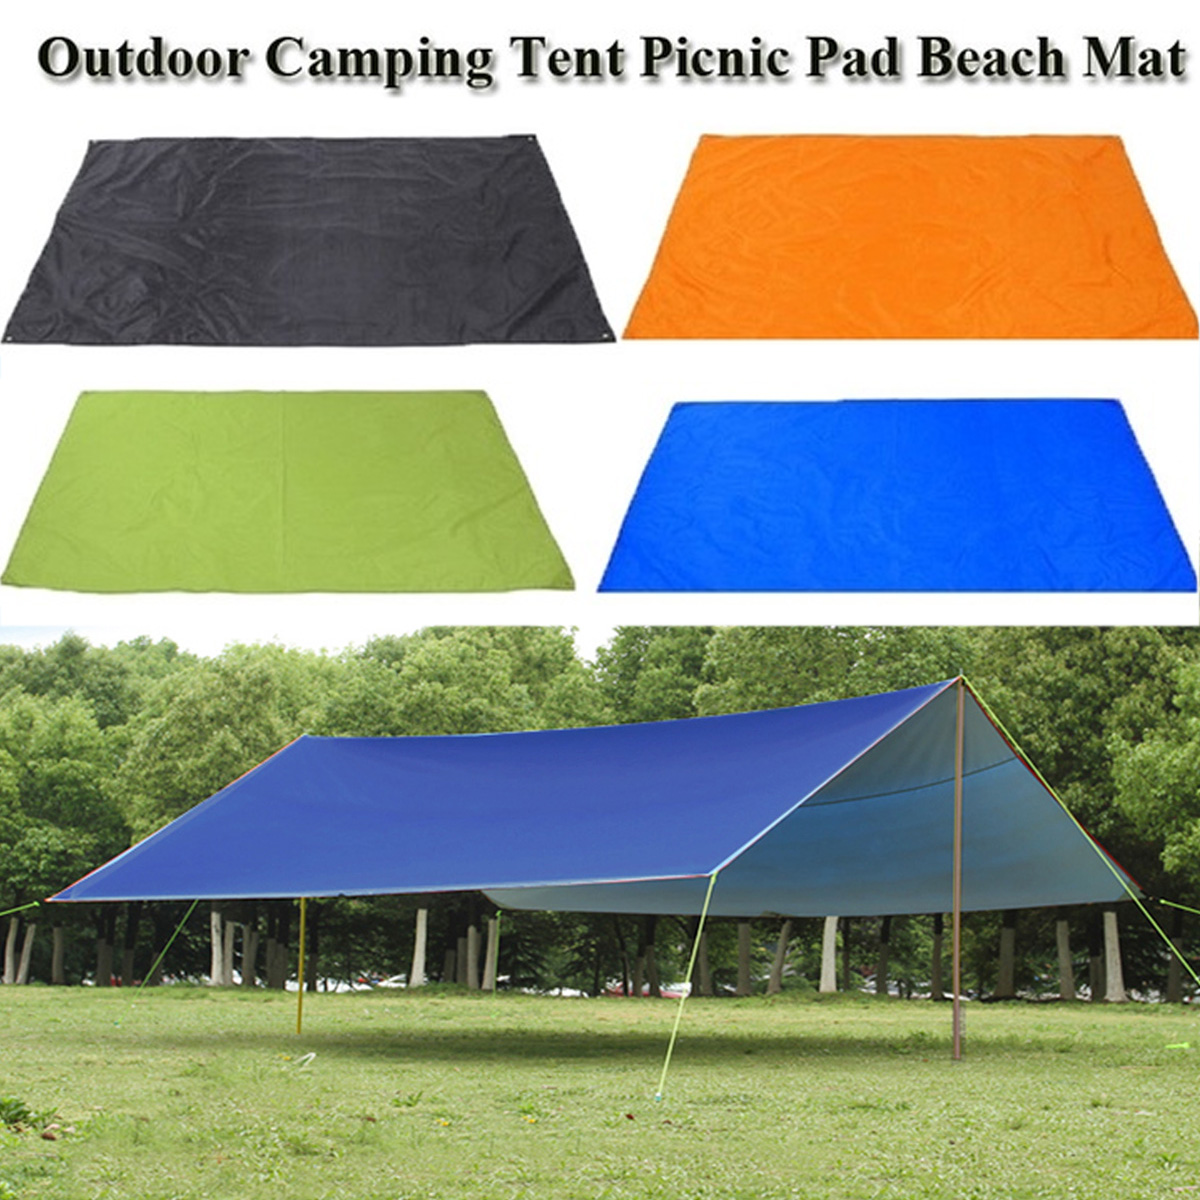 Waterproof Camping Shelter Tarp Cover for Outdoor Use. Huakii Tent Tarp